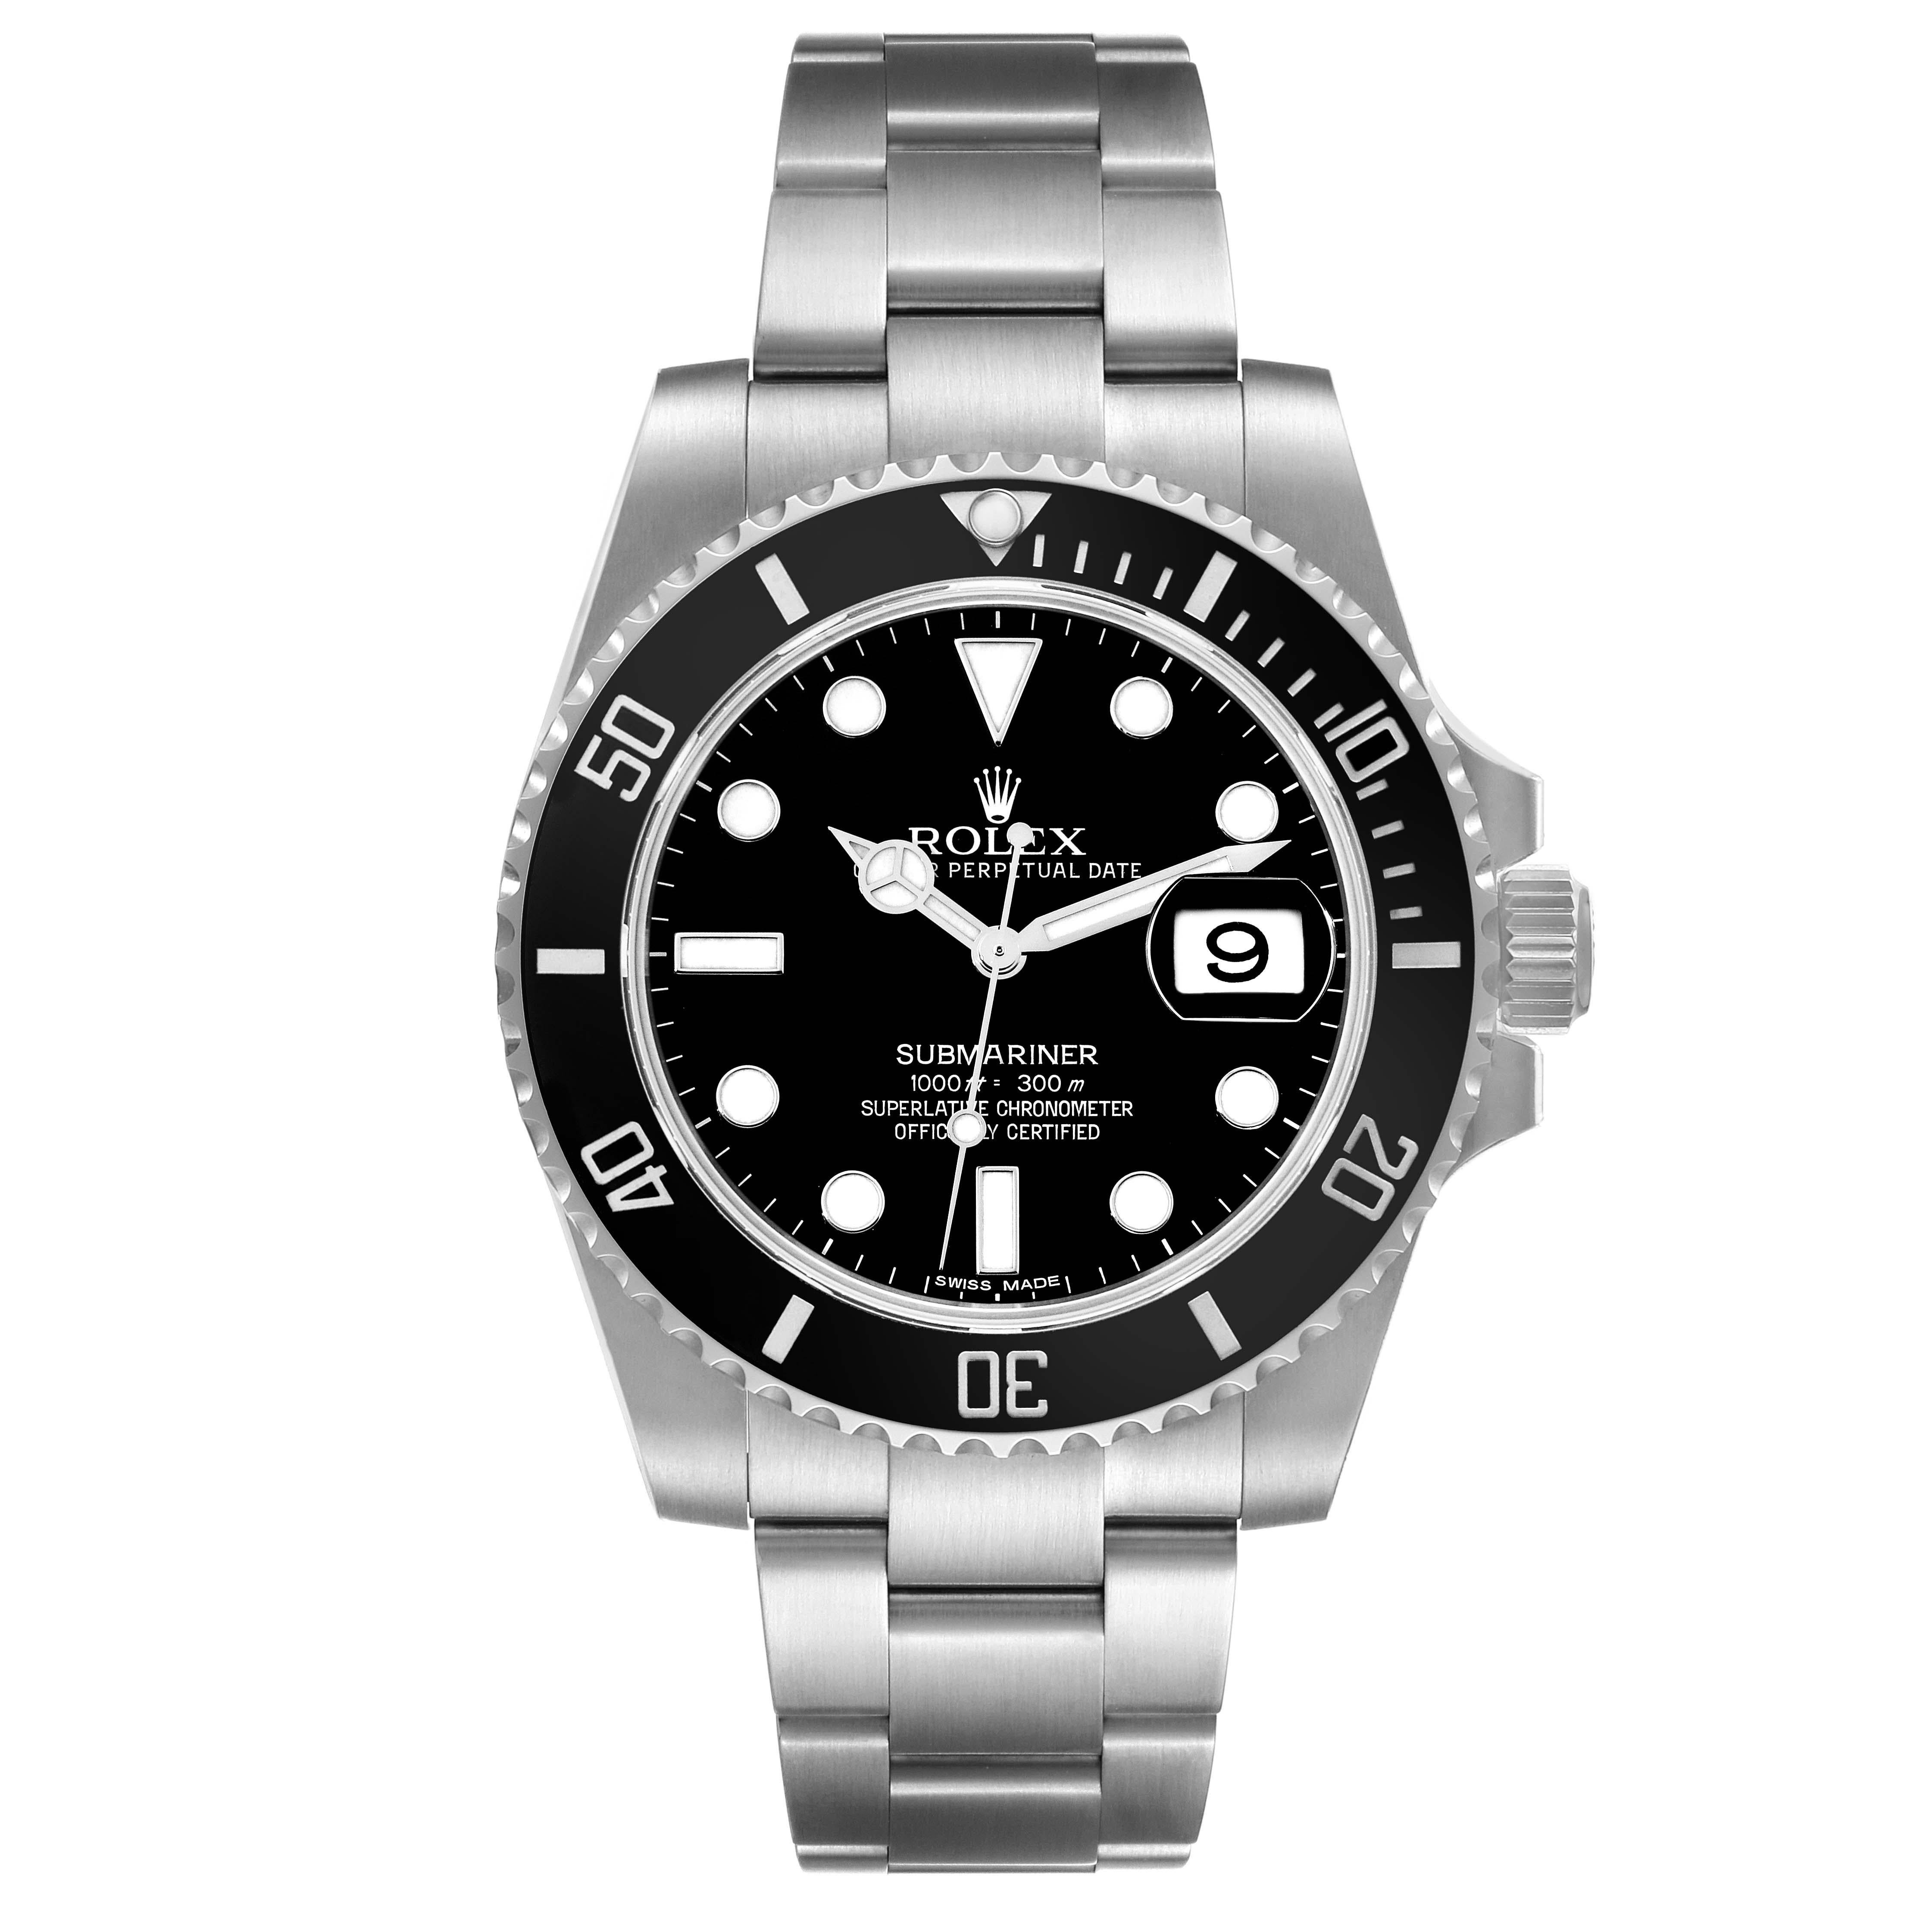 Rolex Submariner Date Black Dial Steel Mens Watch 116610 Box Card. Officially certified chronometer automatic self-winding movement. Stainless steel case 40 mm in diameter. Rolex logo on the crown. Unidirectional rotating black ceramic bezel with 60